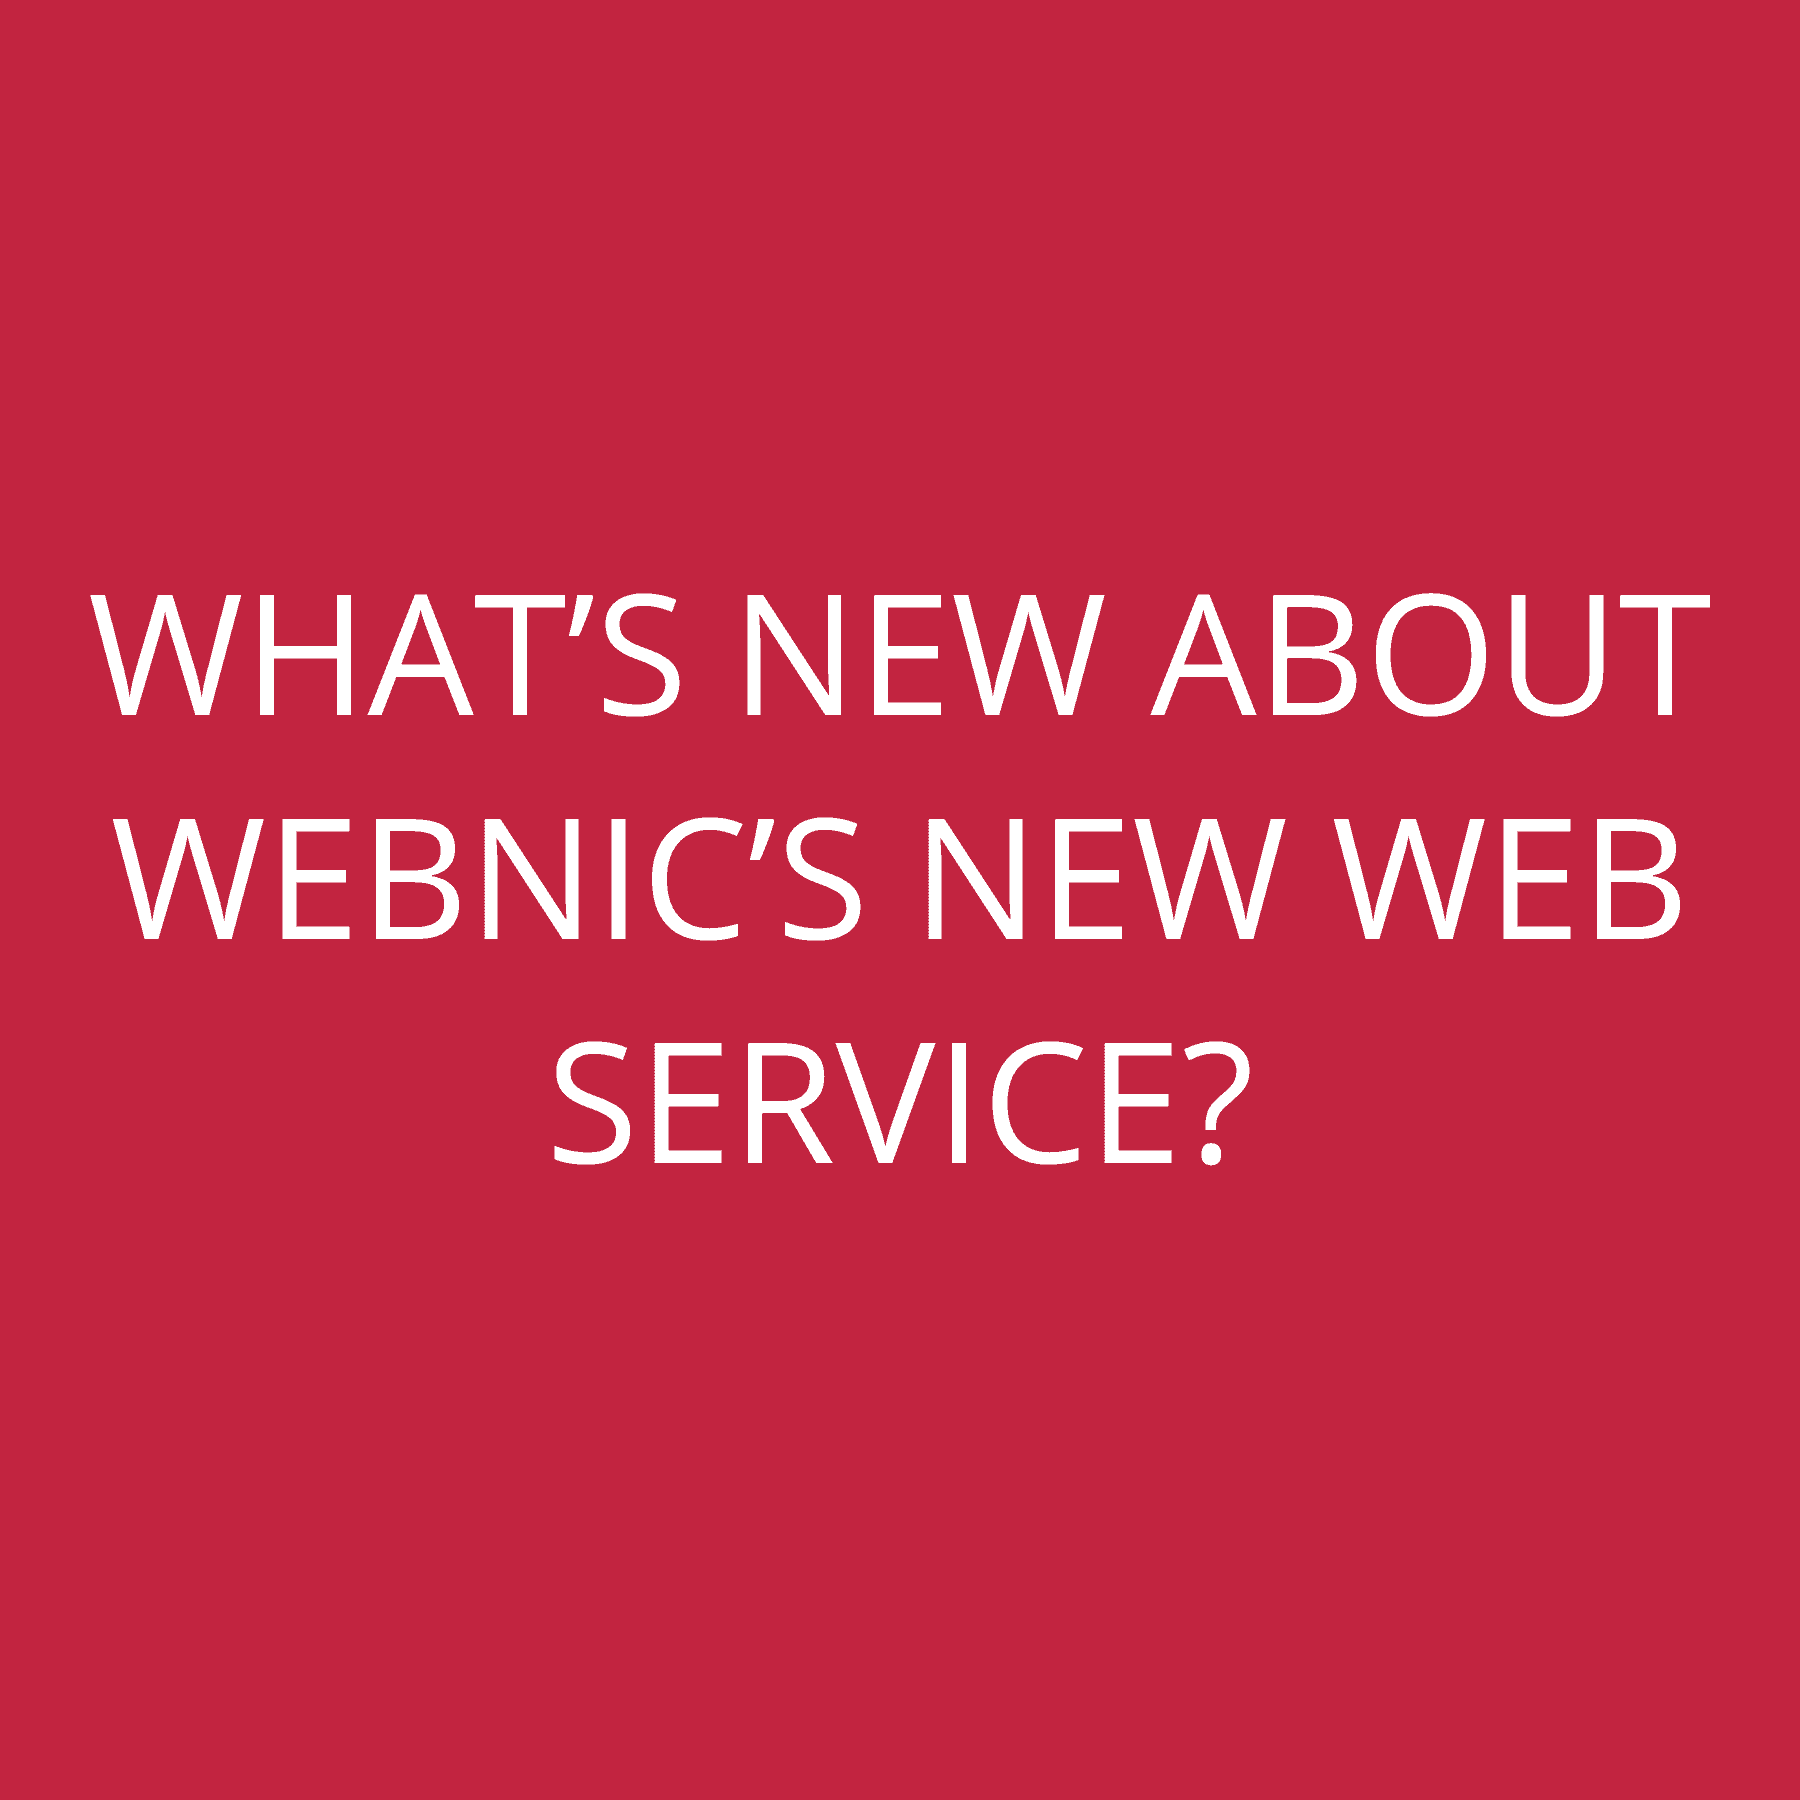 What’s new about WebNIC’s new web service?